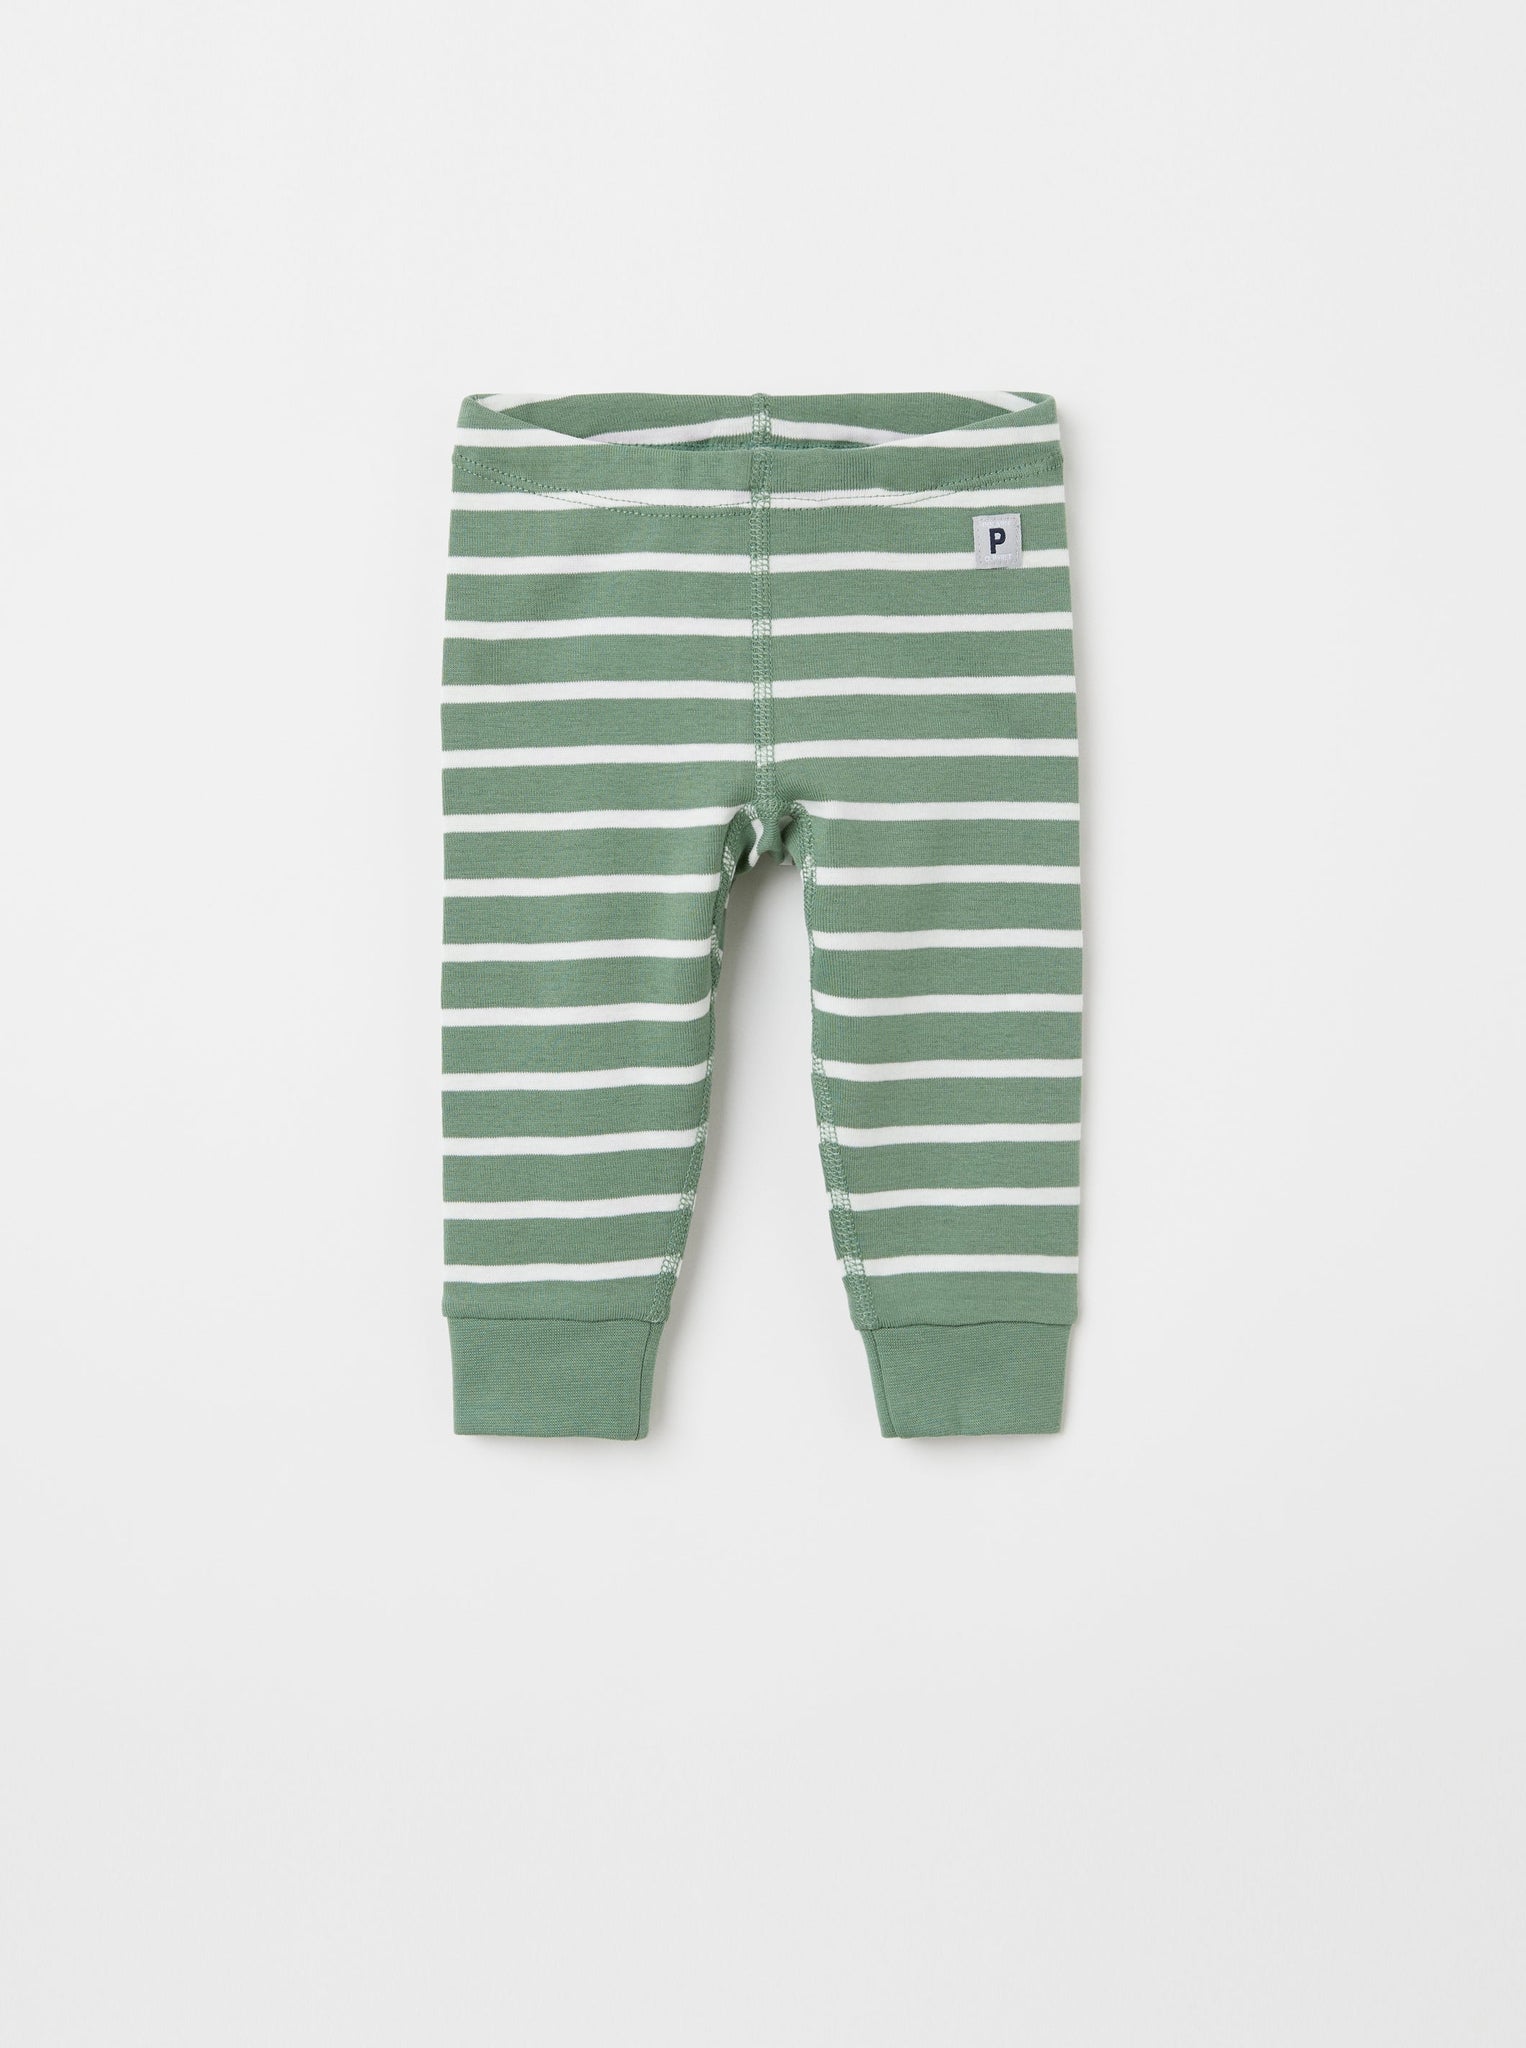 Organic Cotton Navy Baby Leggings from the Polarn O. Pyret Kidswear collection. Nordic kids clothes made from sustainable sources.